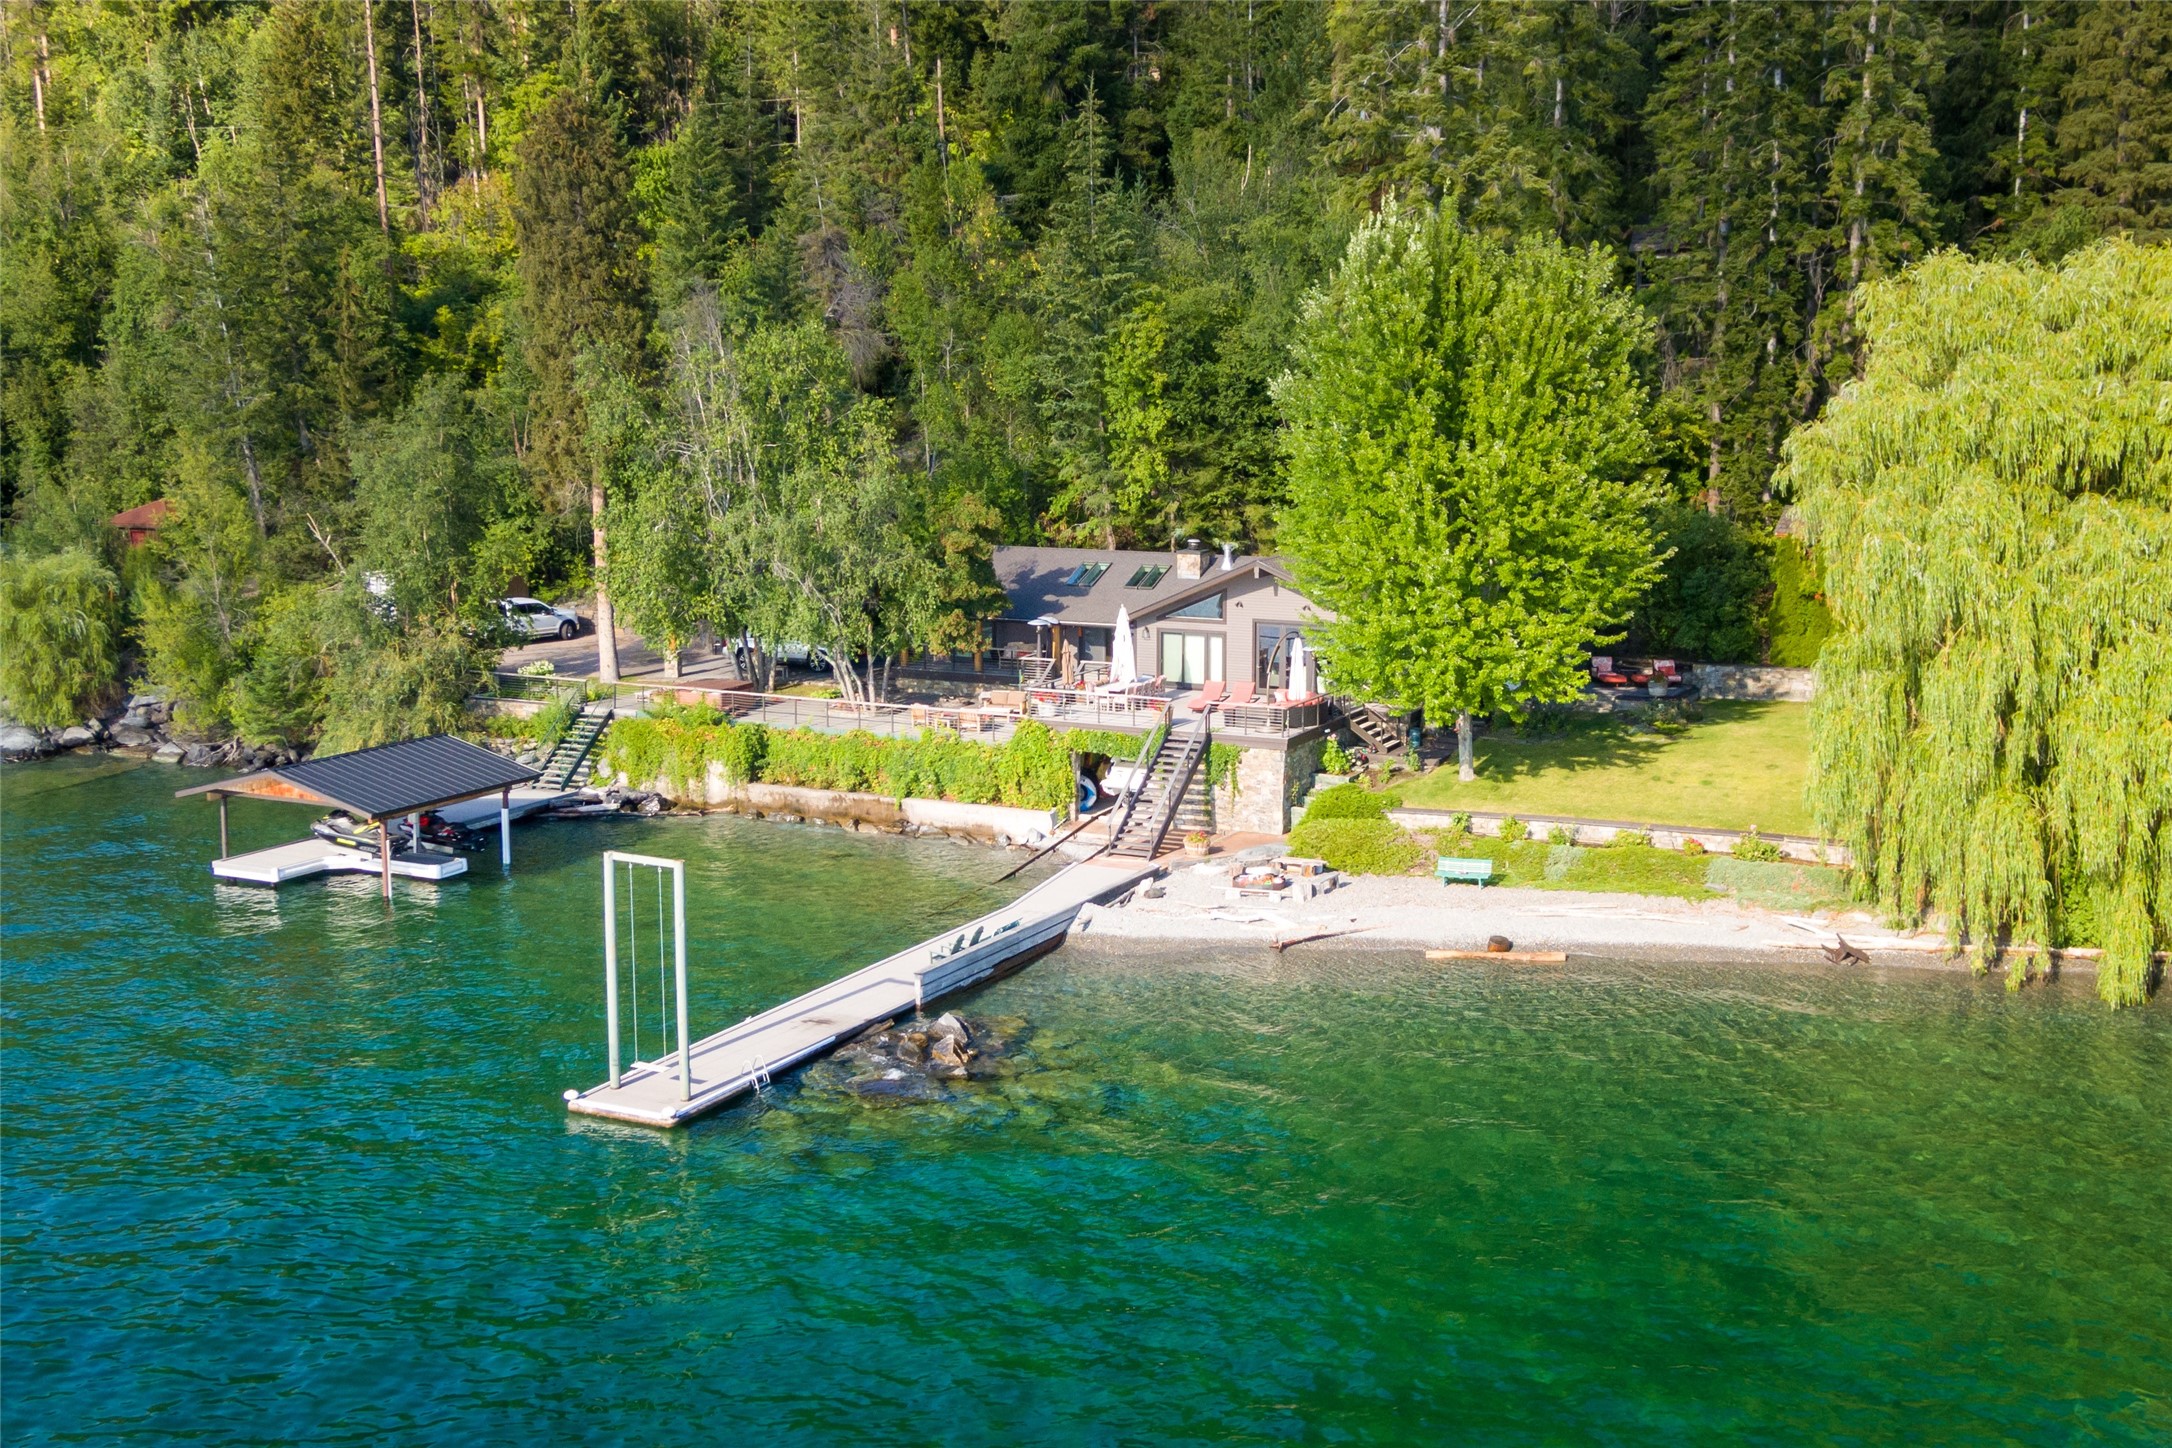 Imagine living with Flathead Lake just outside your front door! This 4 bedroom 3 bath turn-key, fully furnished home is sited to perfection on 1.5 acres with 241 feet of prime frontage. The 2 docks with Jet Skis and indoor boat storage with boat are ready for you to come and enjoy the summer! The flowing indoor/outdoor living space is an entertainer's dream and the hot tub and beach front fire pit beckon family and friends for endless conversations and memories created. Grandfathered boathouse and home on the lakefront. It doesn't get any closer. Spectacular Flathead Lake Waterfront Investment. Contact Amy Bain-Wilson at 406-370-9101, or your real estate professional today for details and a showing.